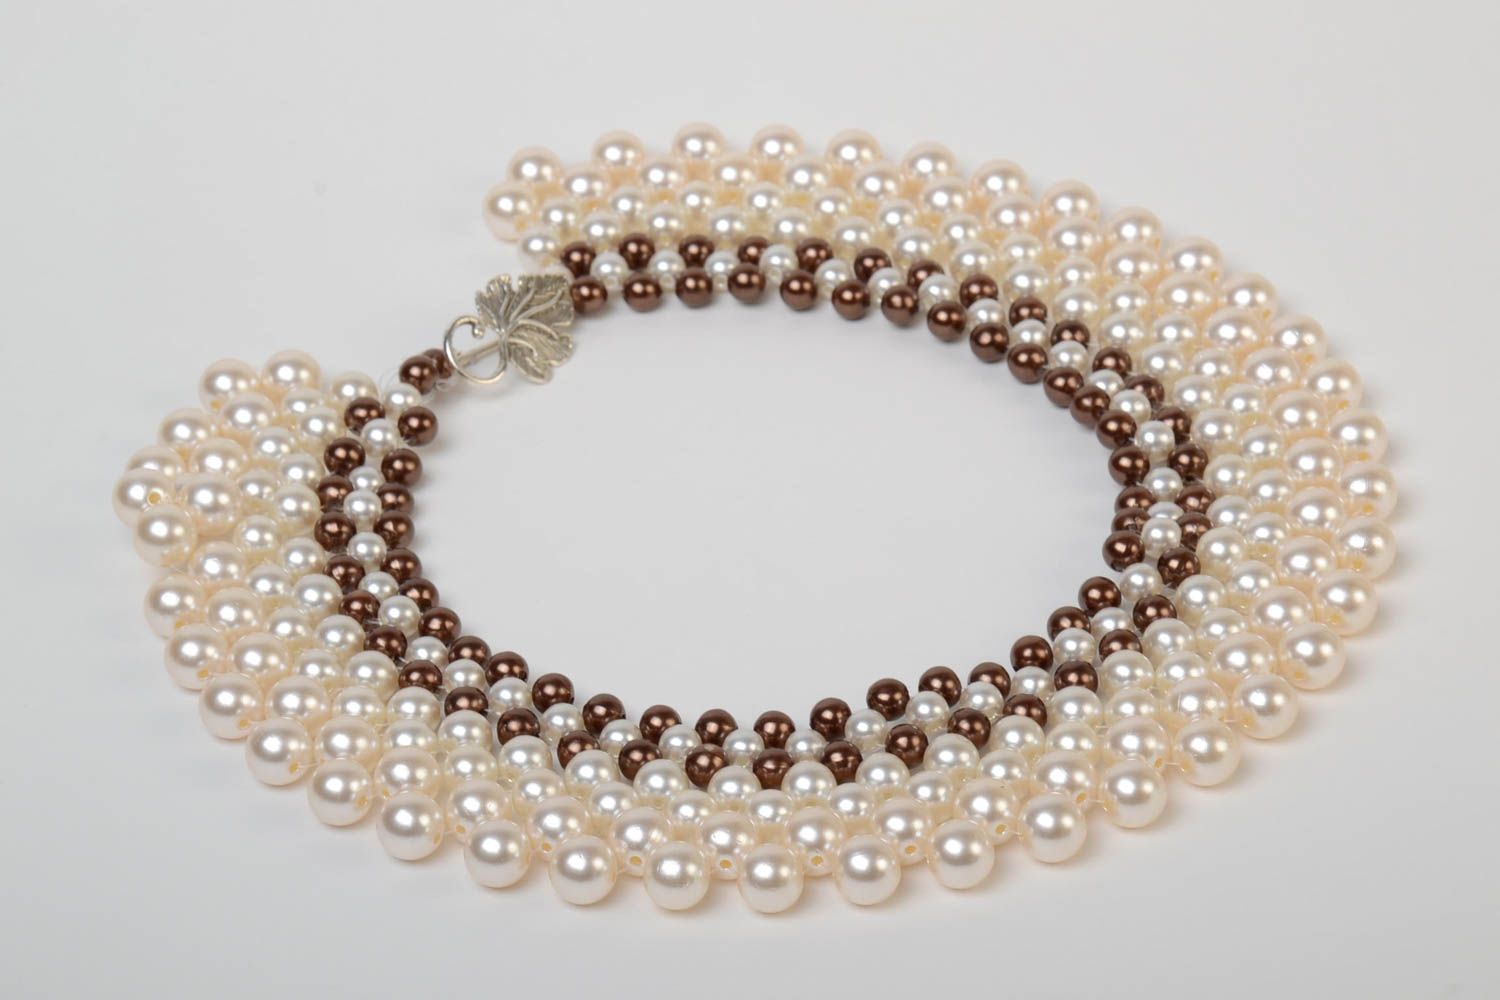 Gentle brown and white handmade woven bead necklace photo 2